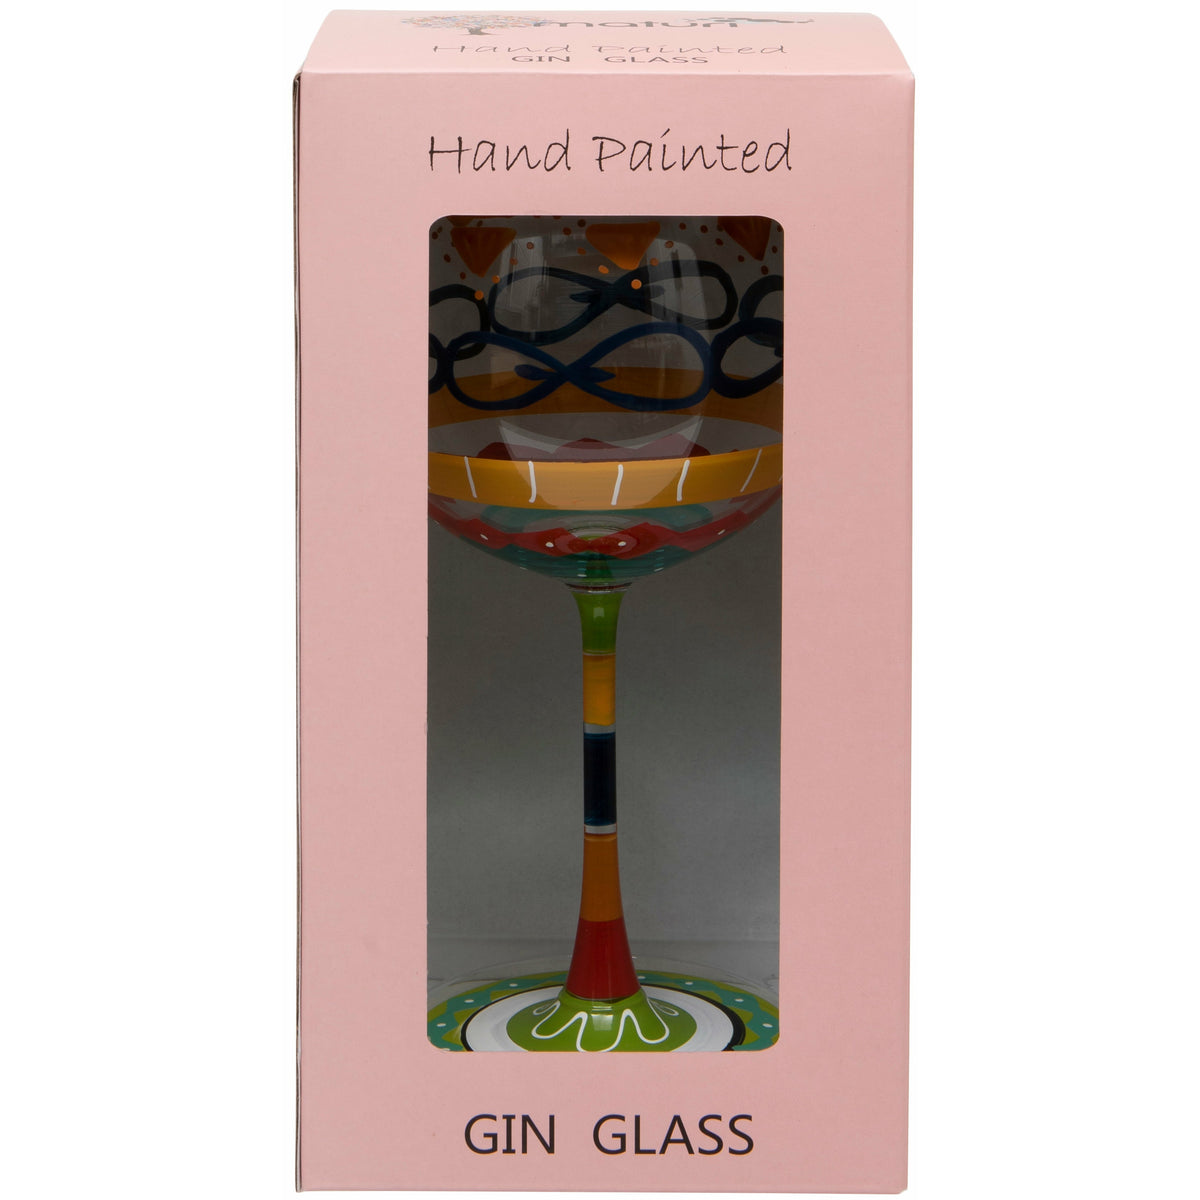 Hand Painted Multi Print Gin Glass in Box